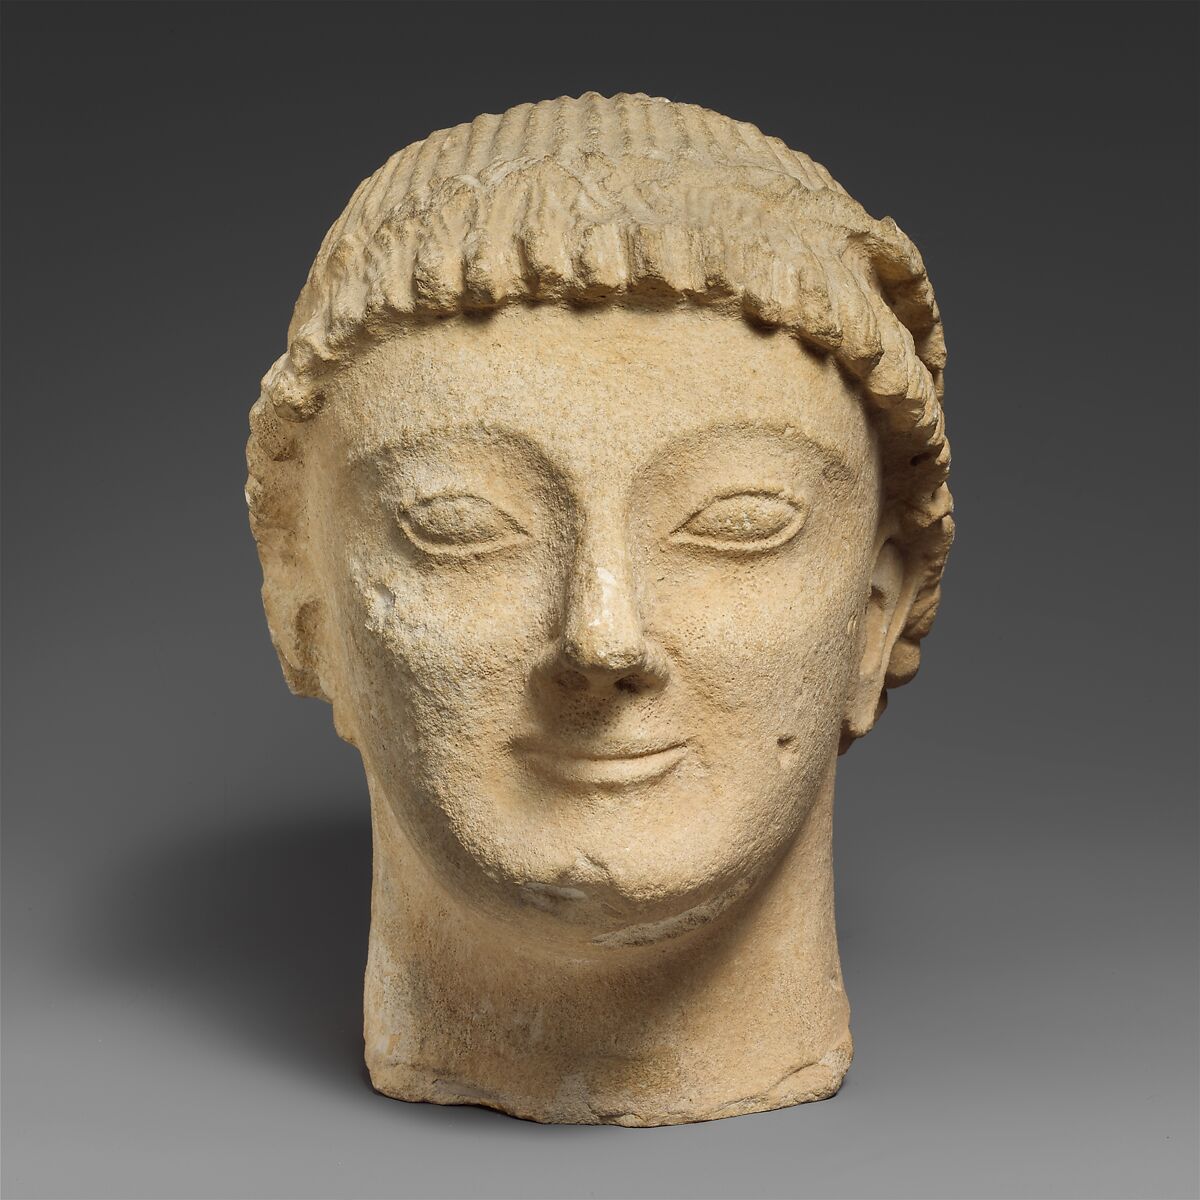 Limestone head of a beardless male votary with a wreath of rosettes, Limestone, Cypriot 